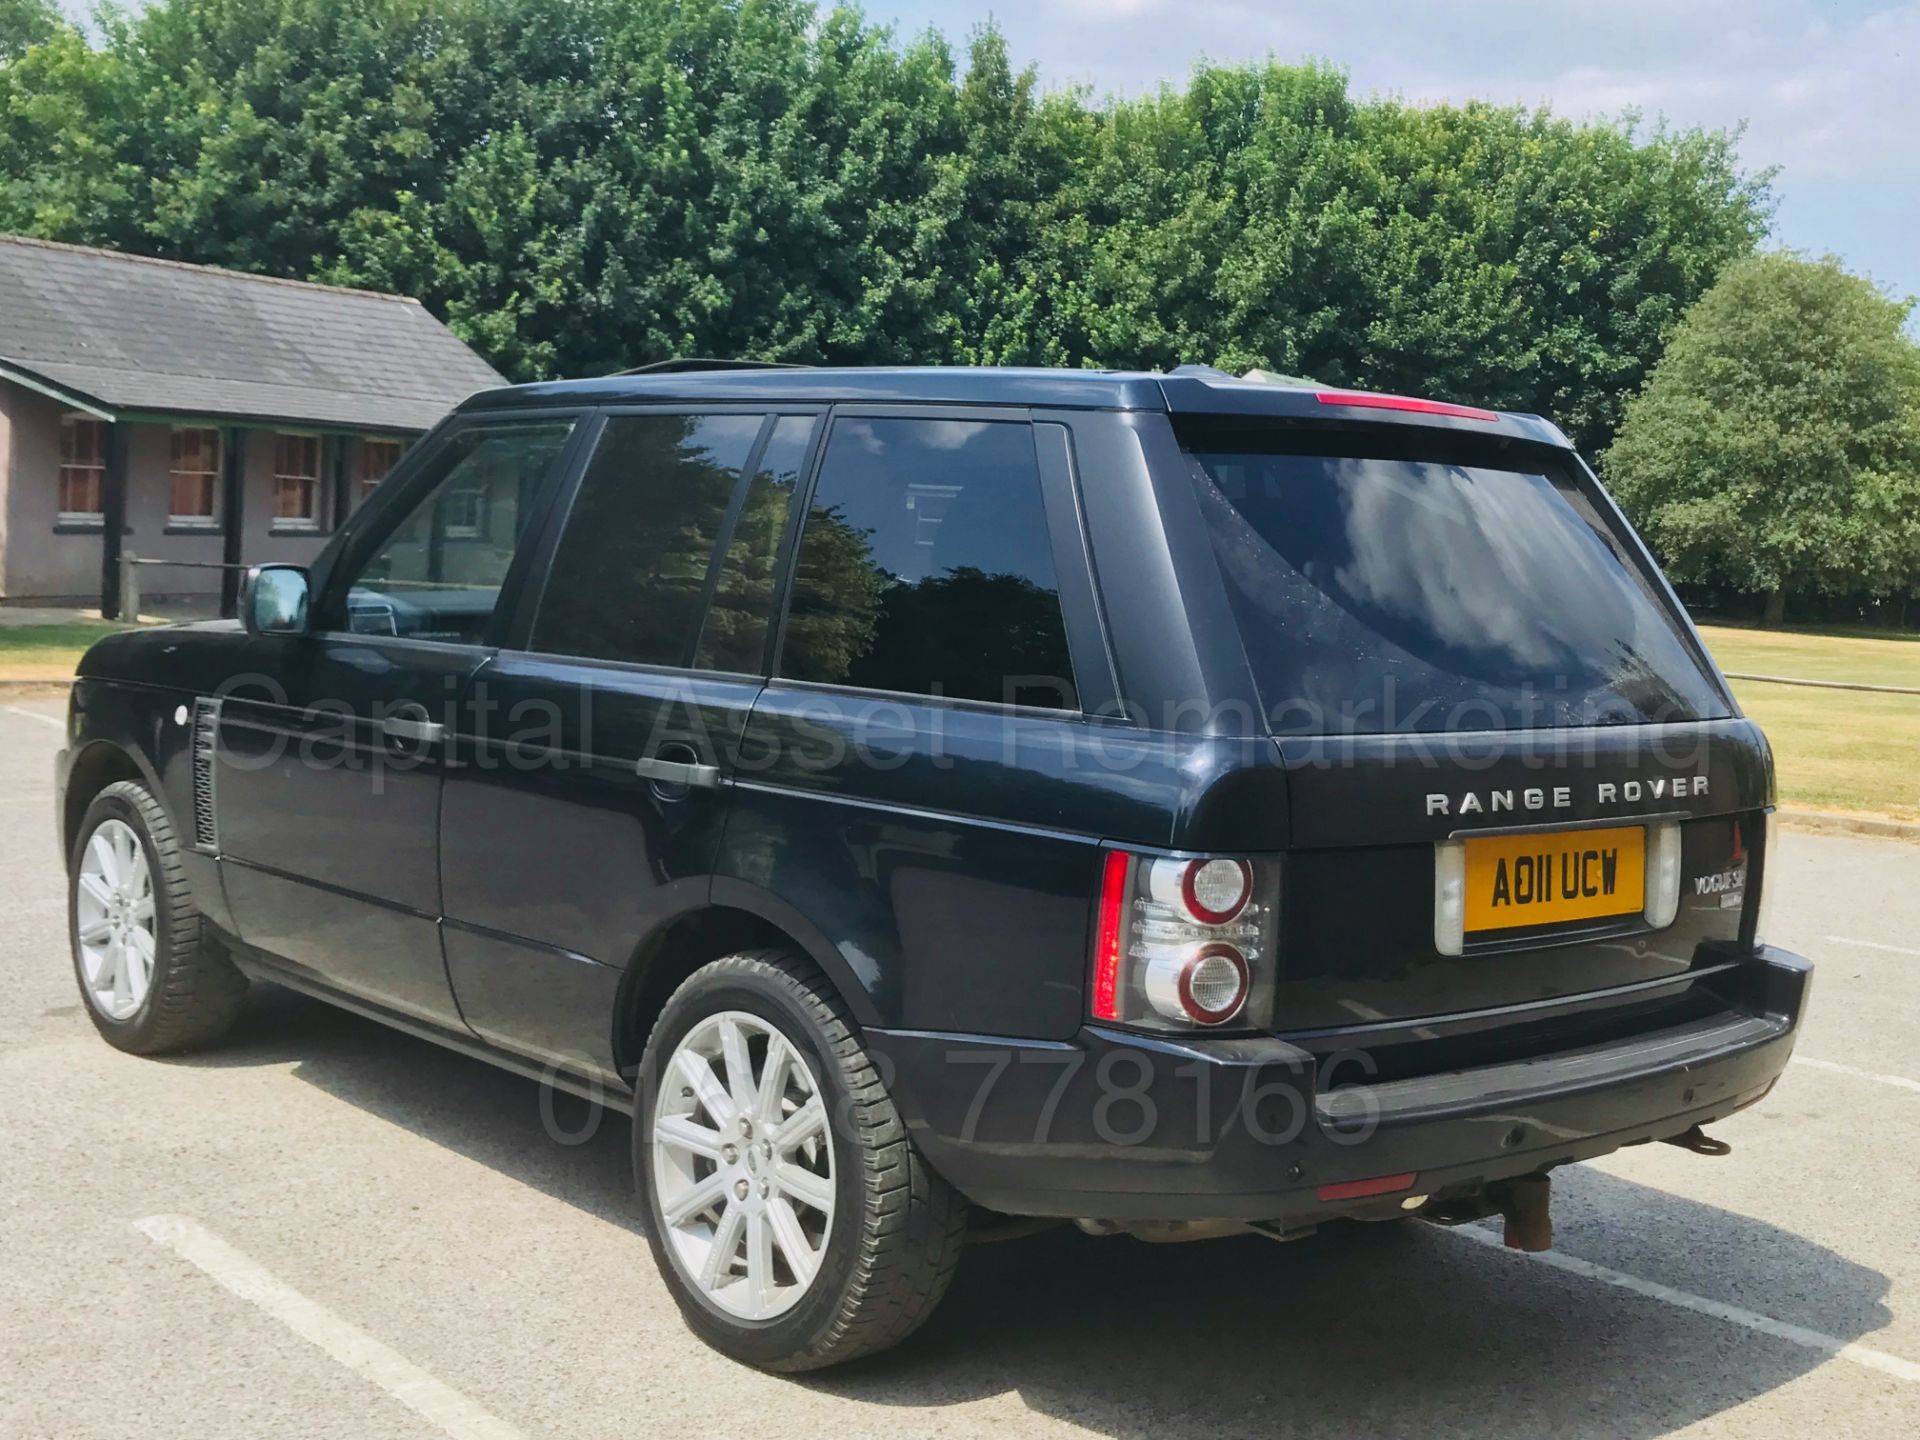 (On Sale) RANGE ROVER VOGUE SE (2011) 'TDV8 -8 SPEED AUTO' **FULLY LOADED** (1 OWNER - FULL HISTORY) - Image 5 of 60